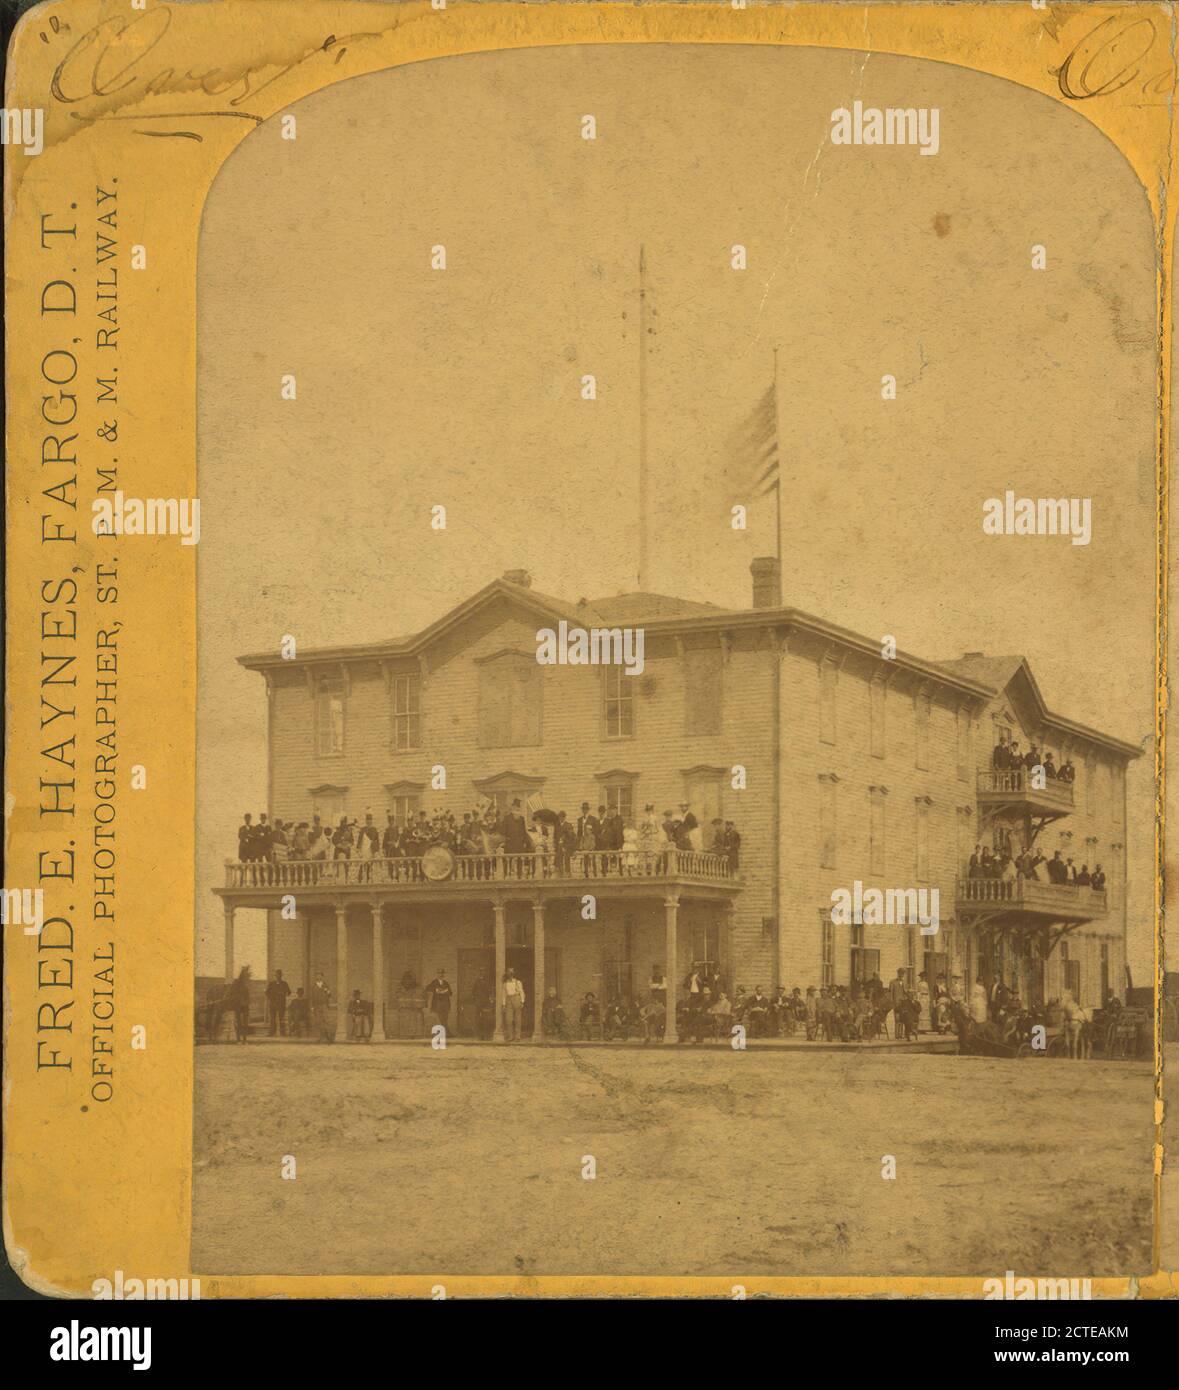 The Grand Central Hotel at Hope, D.T. Dakota Territory, the end of the Manatoba Manitoba west branch in August 1882. About 70 miles from Larimore south-west., Haynes, F. Jay (Frank Jay) (1853-1921), Haynes, Fred. E. (Frederick E.) (b. 1861), 1882, North Dakota, Hope (N.D Stock Photo